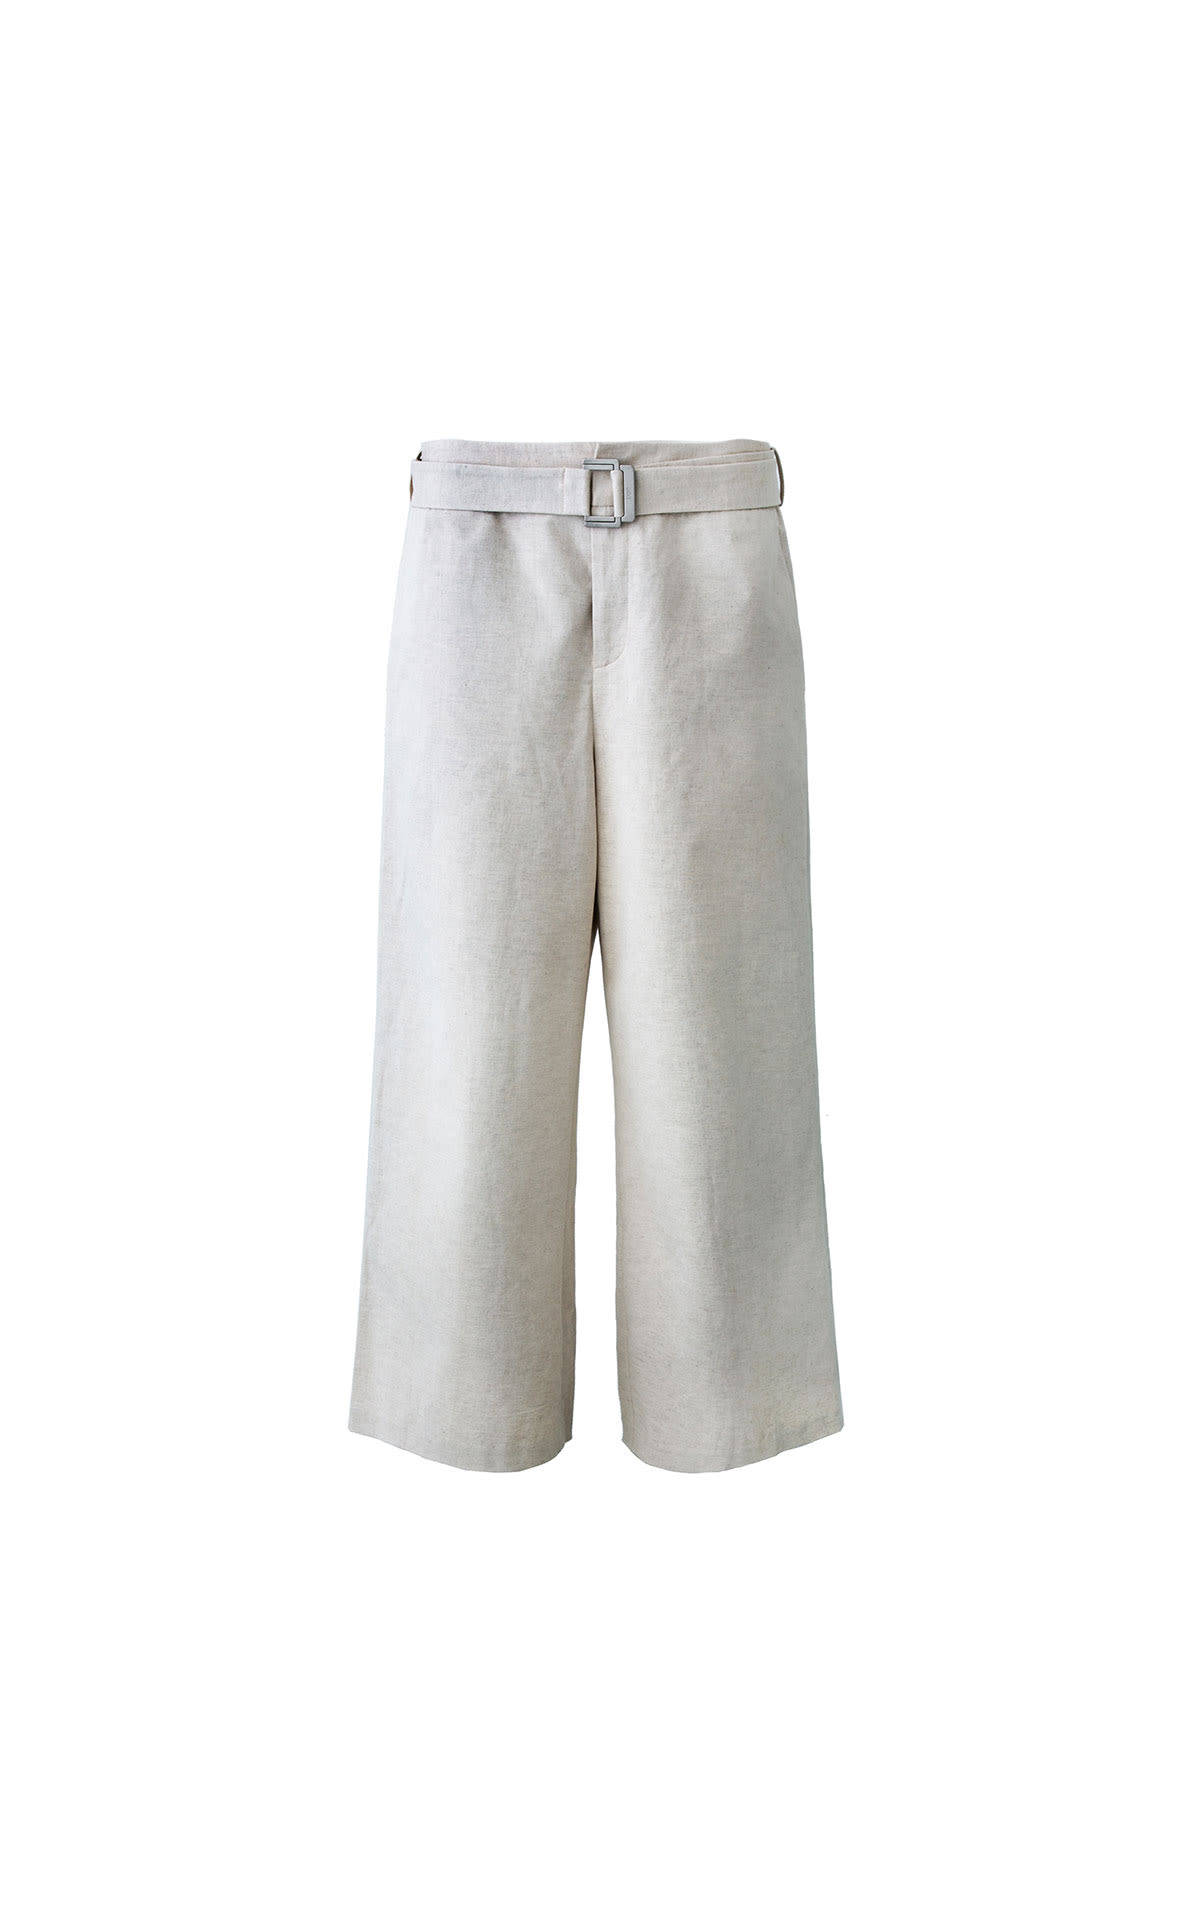 DKNY Linen wide leg pant from Bicester Village